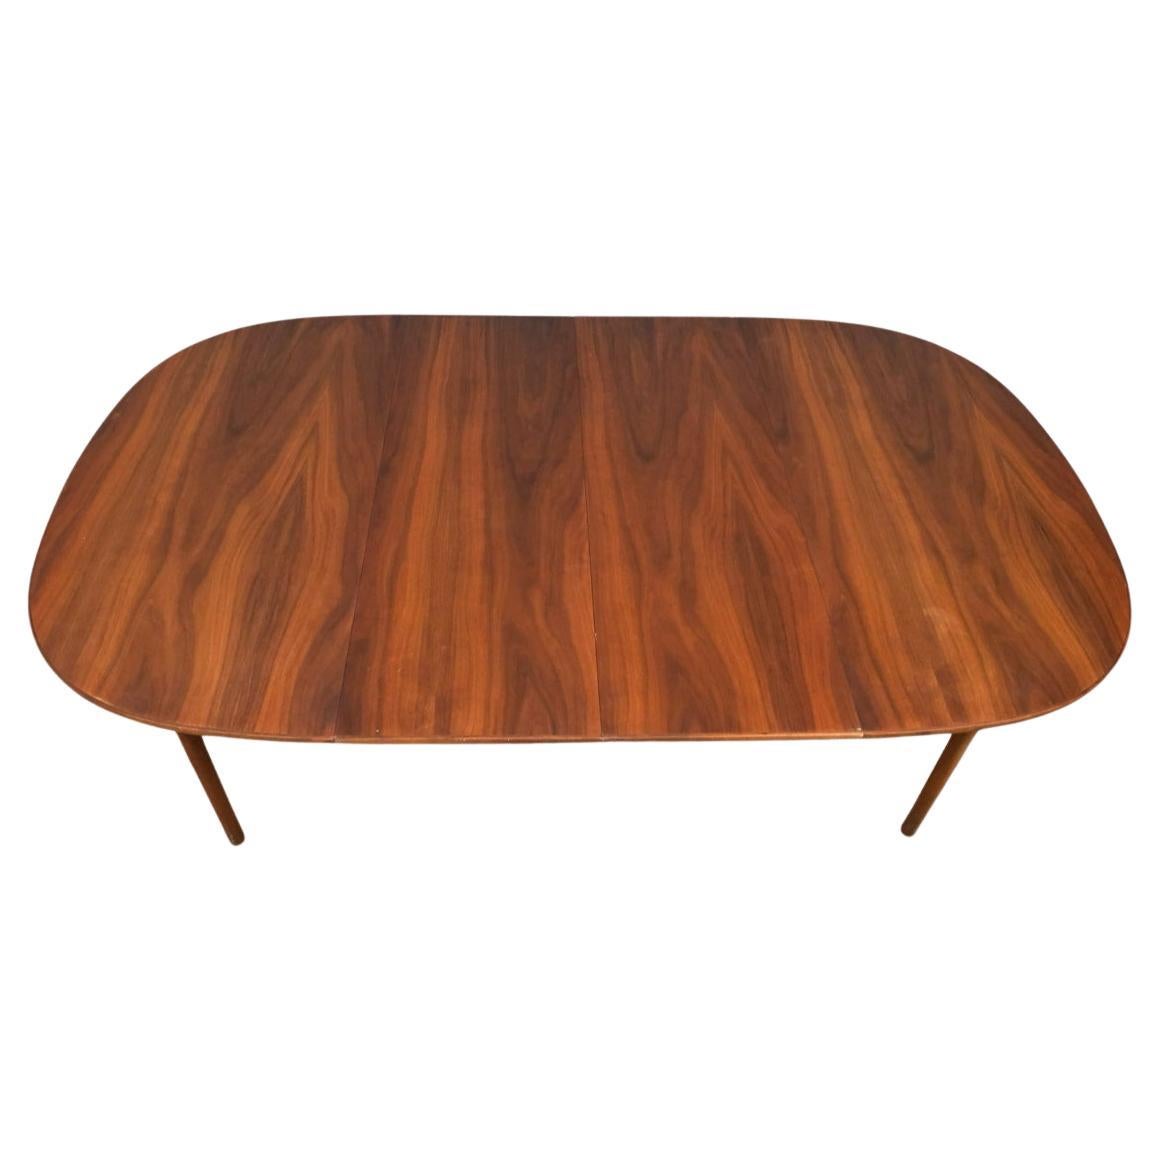 Woodwork Stunning Mid century modern danish teak rounded dining table with two leaves For Sale